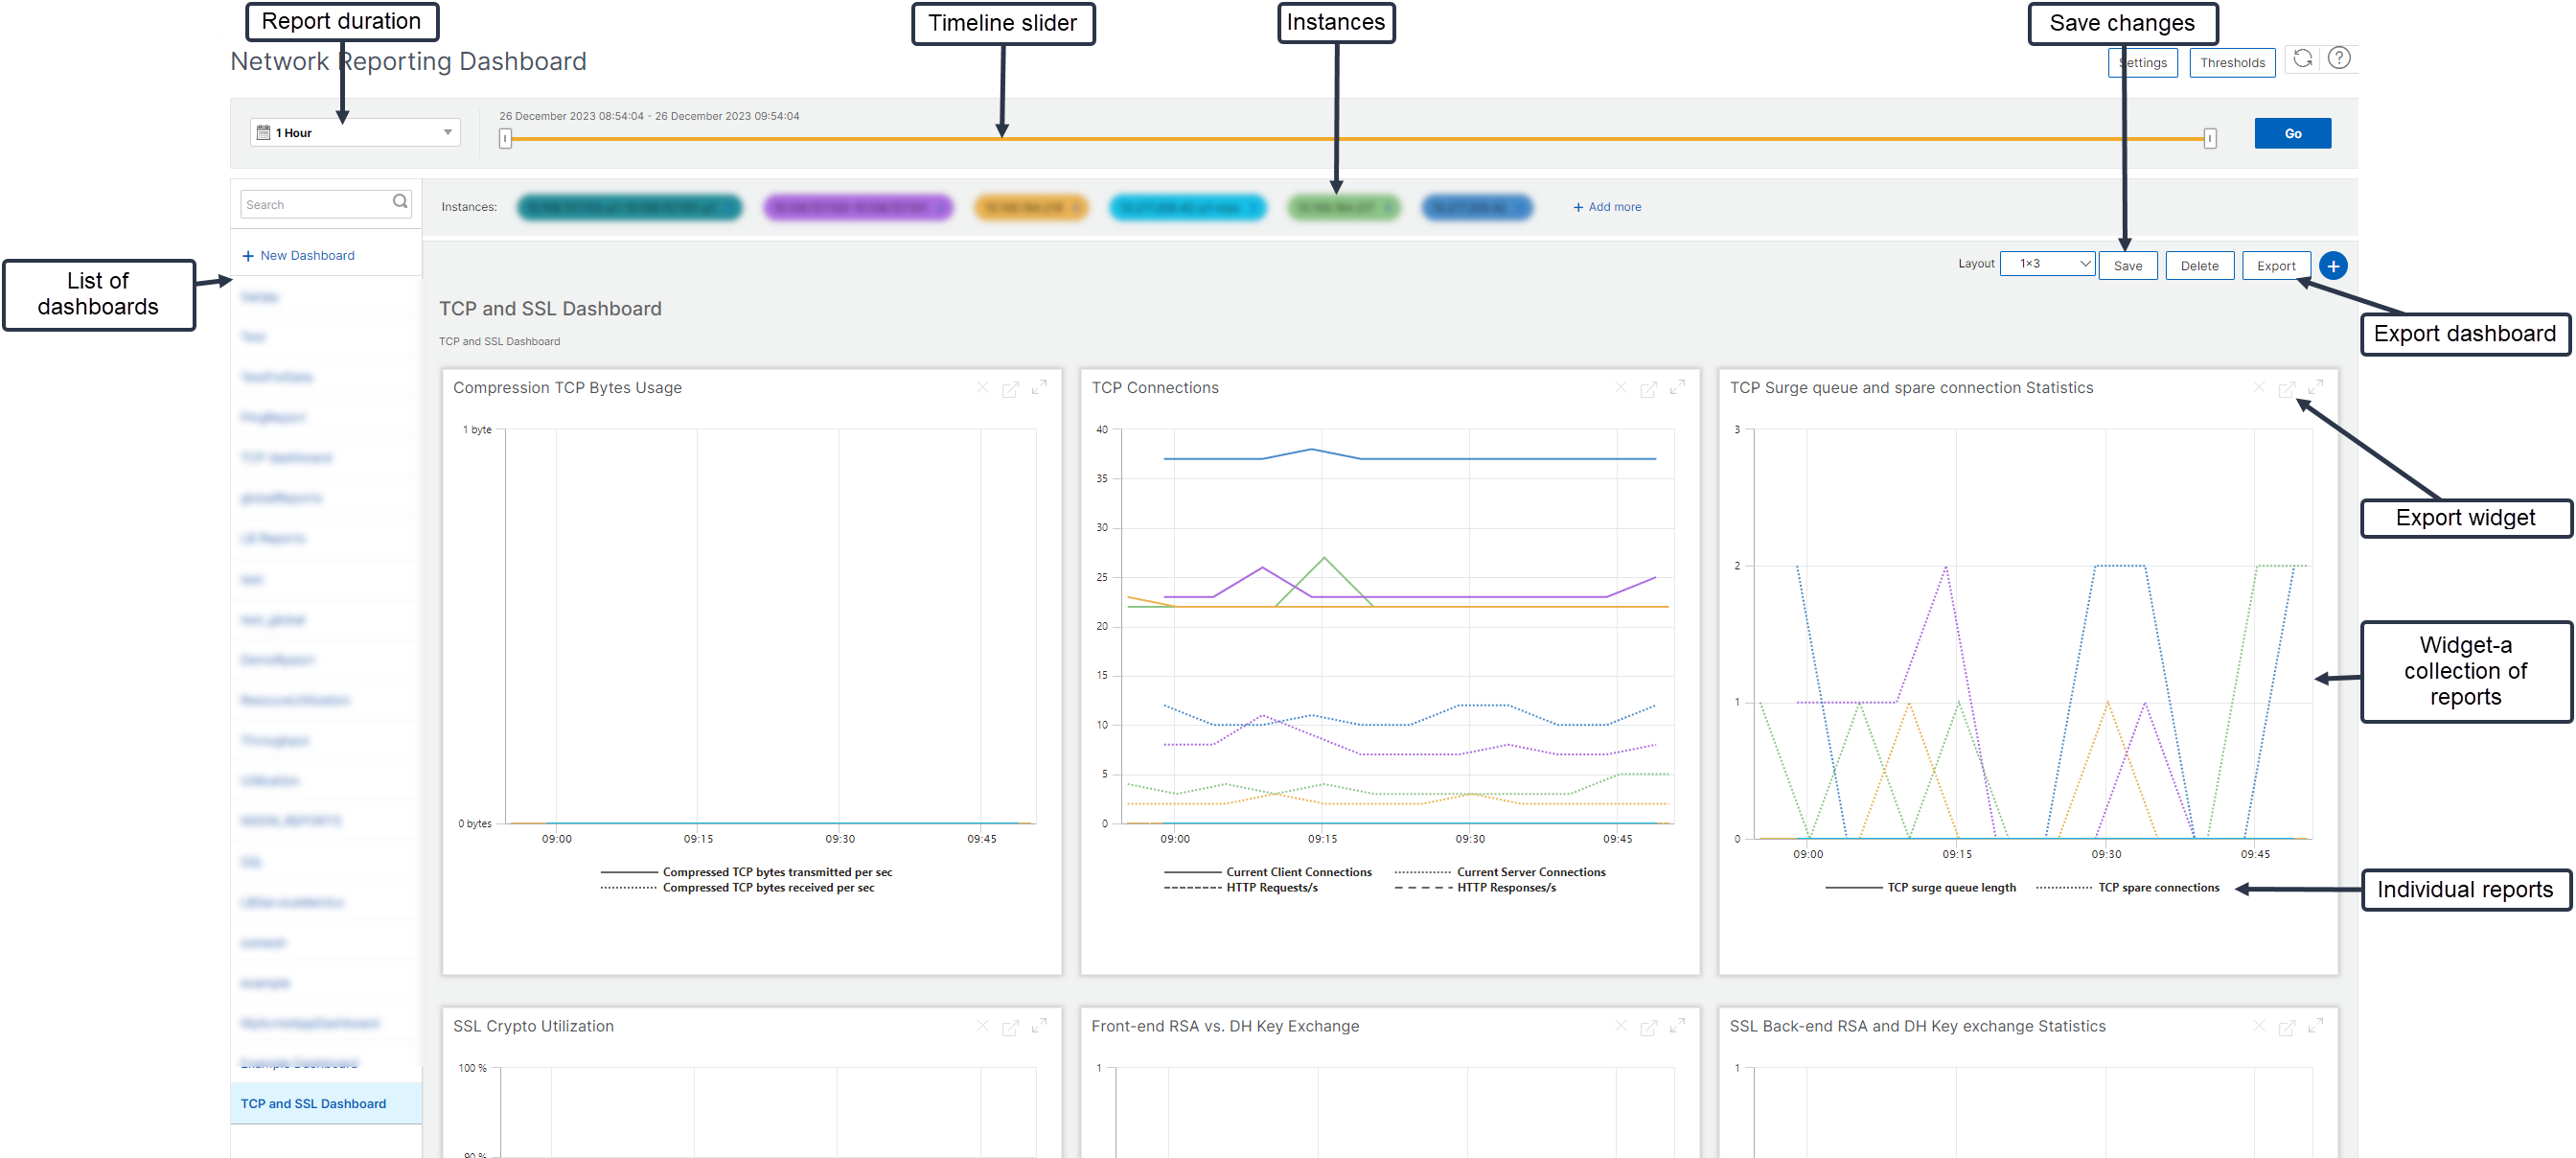 Network reporting dashboard overview